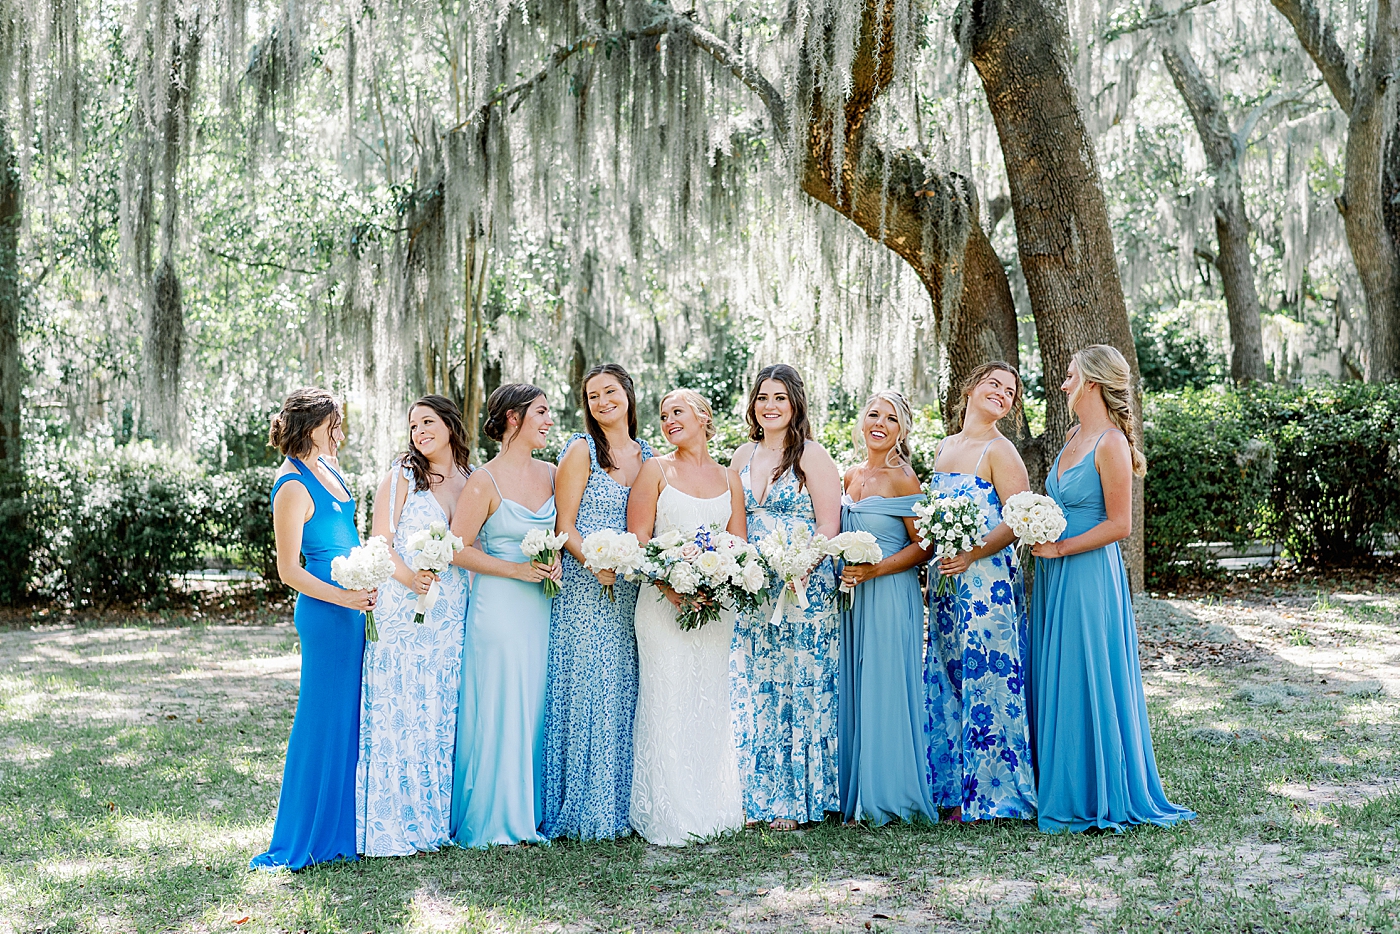 Bride with her bridesmaids all in blue | Images by Annie Laura Photography